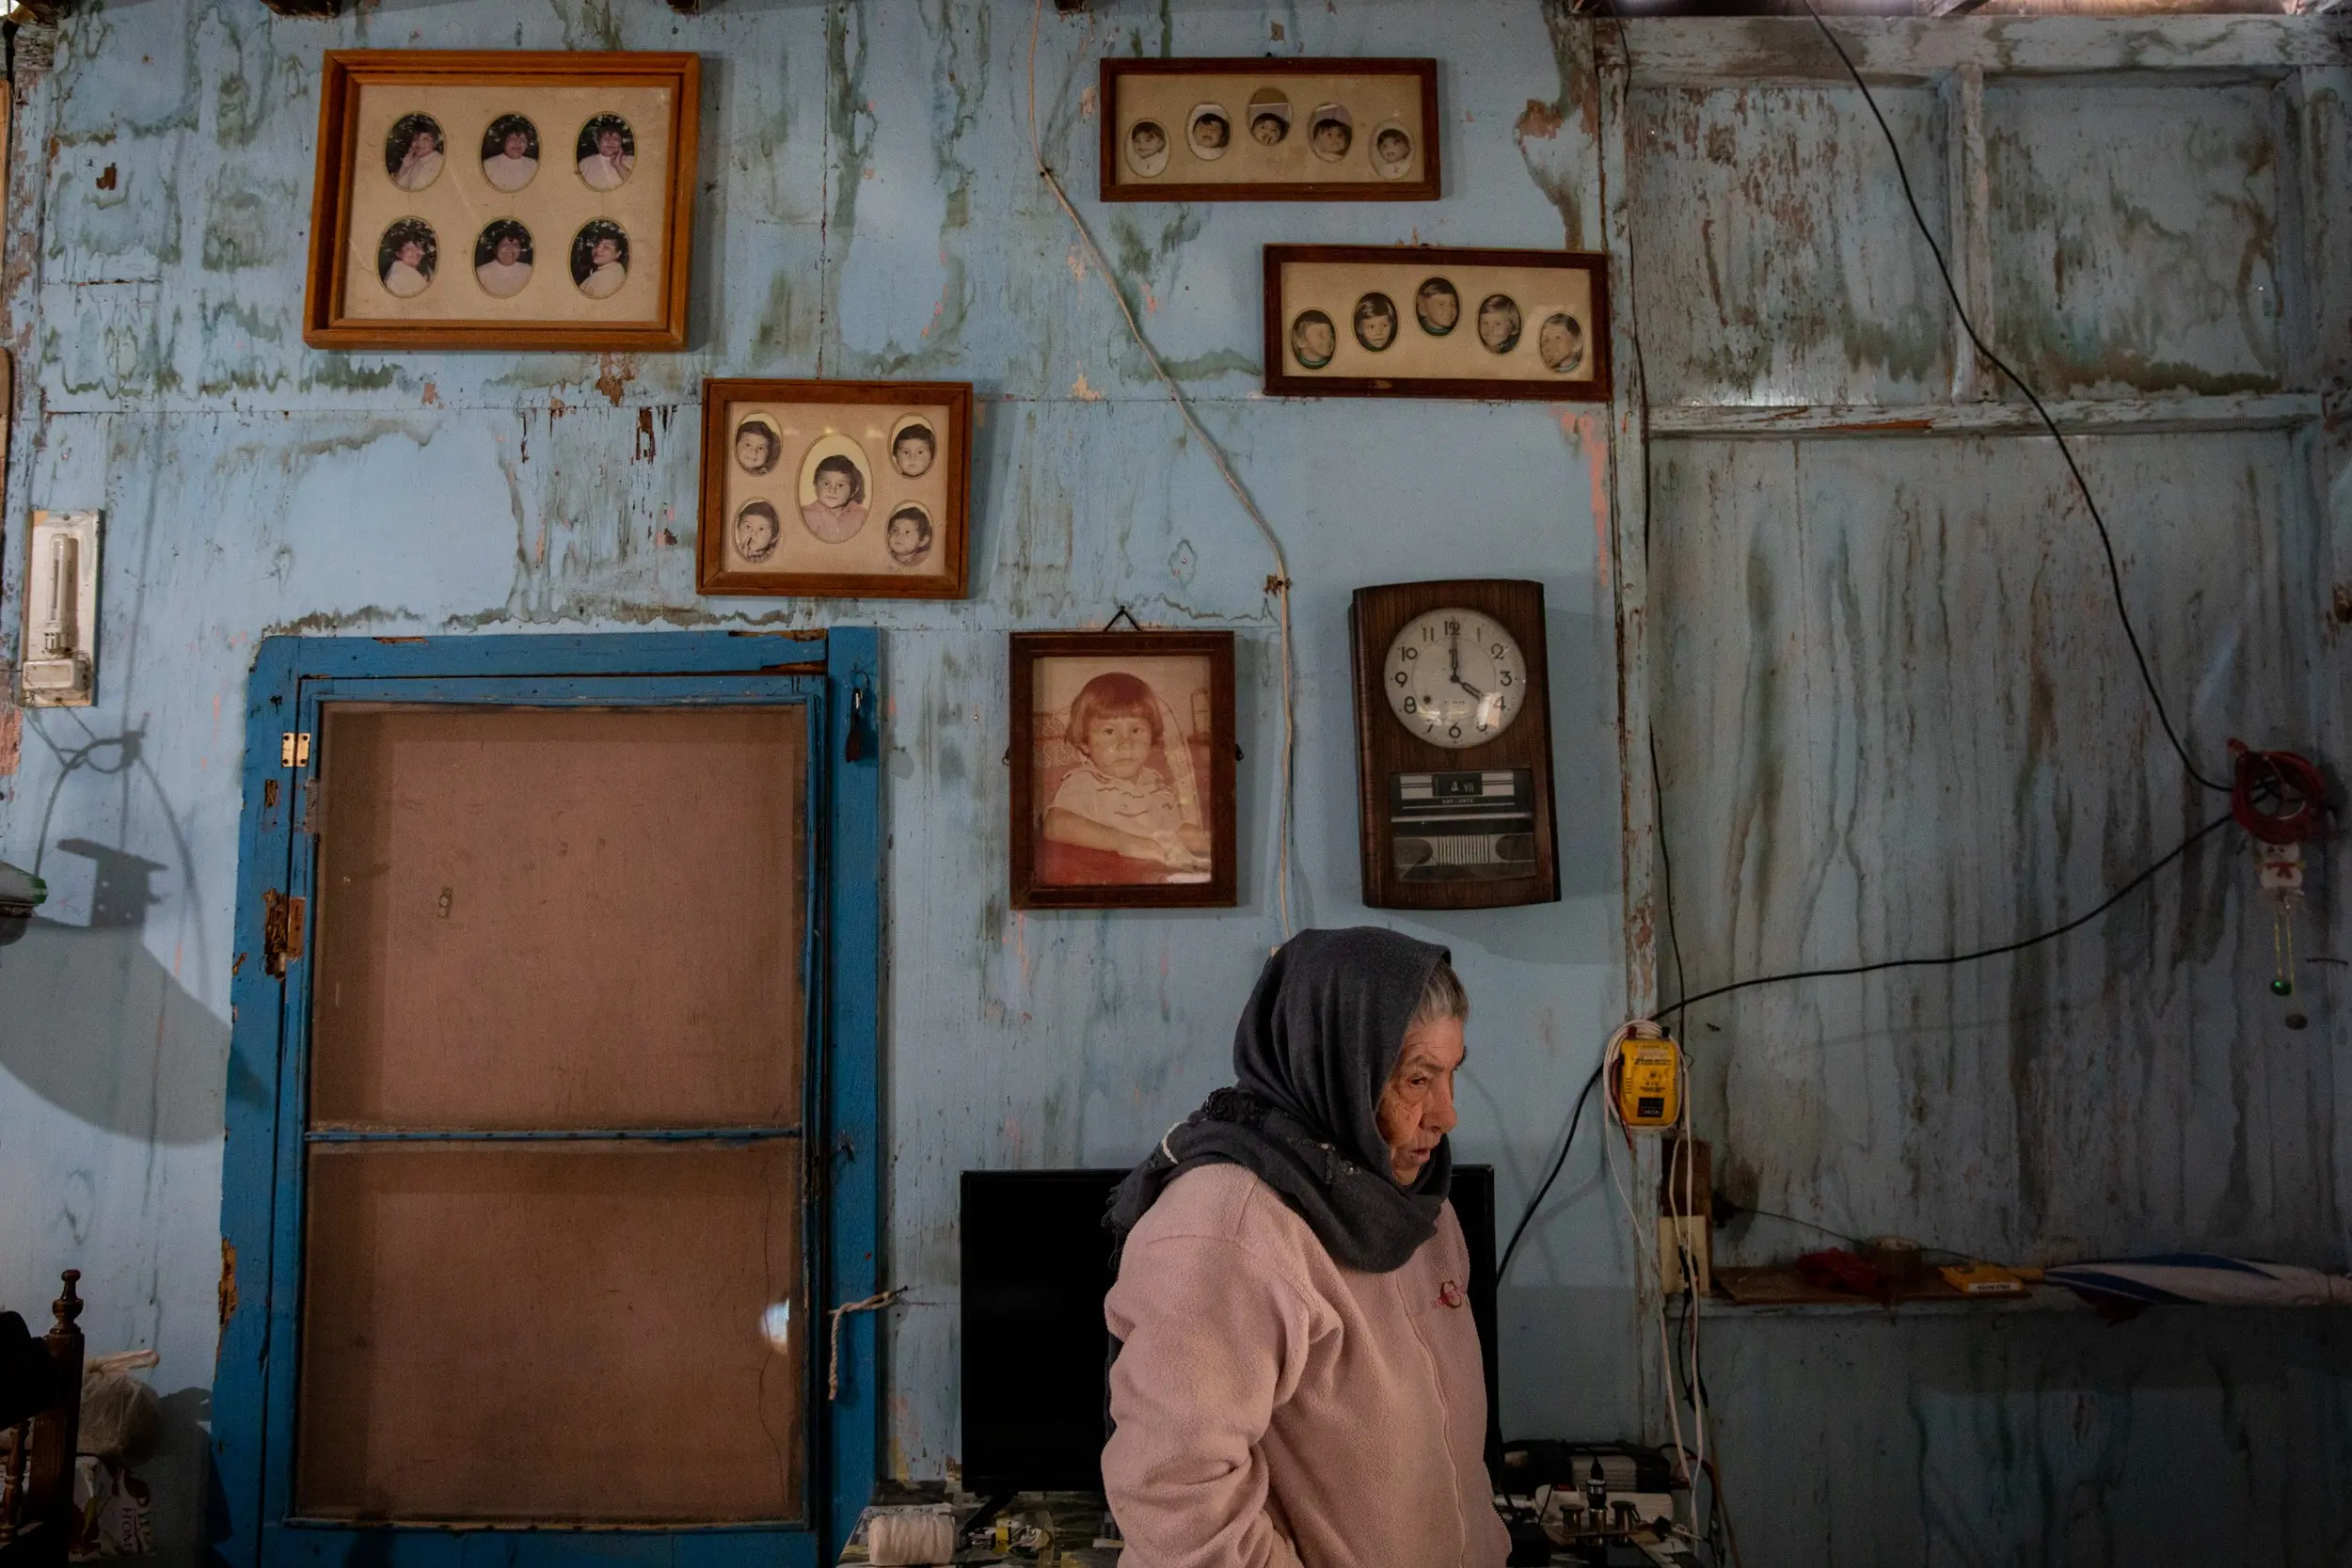 A woman stands in front of a wall with childhood photos, and a clock.